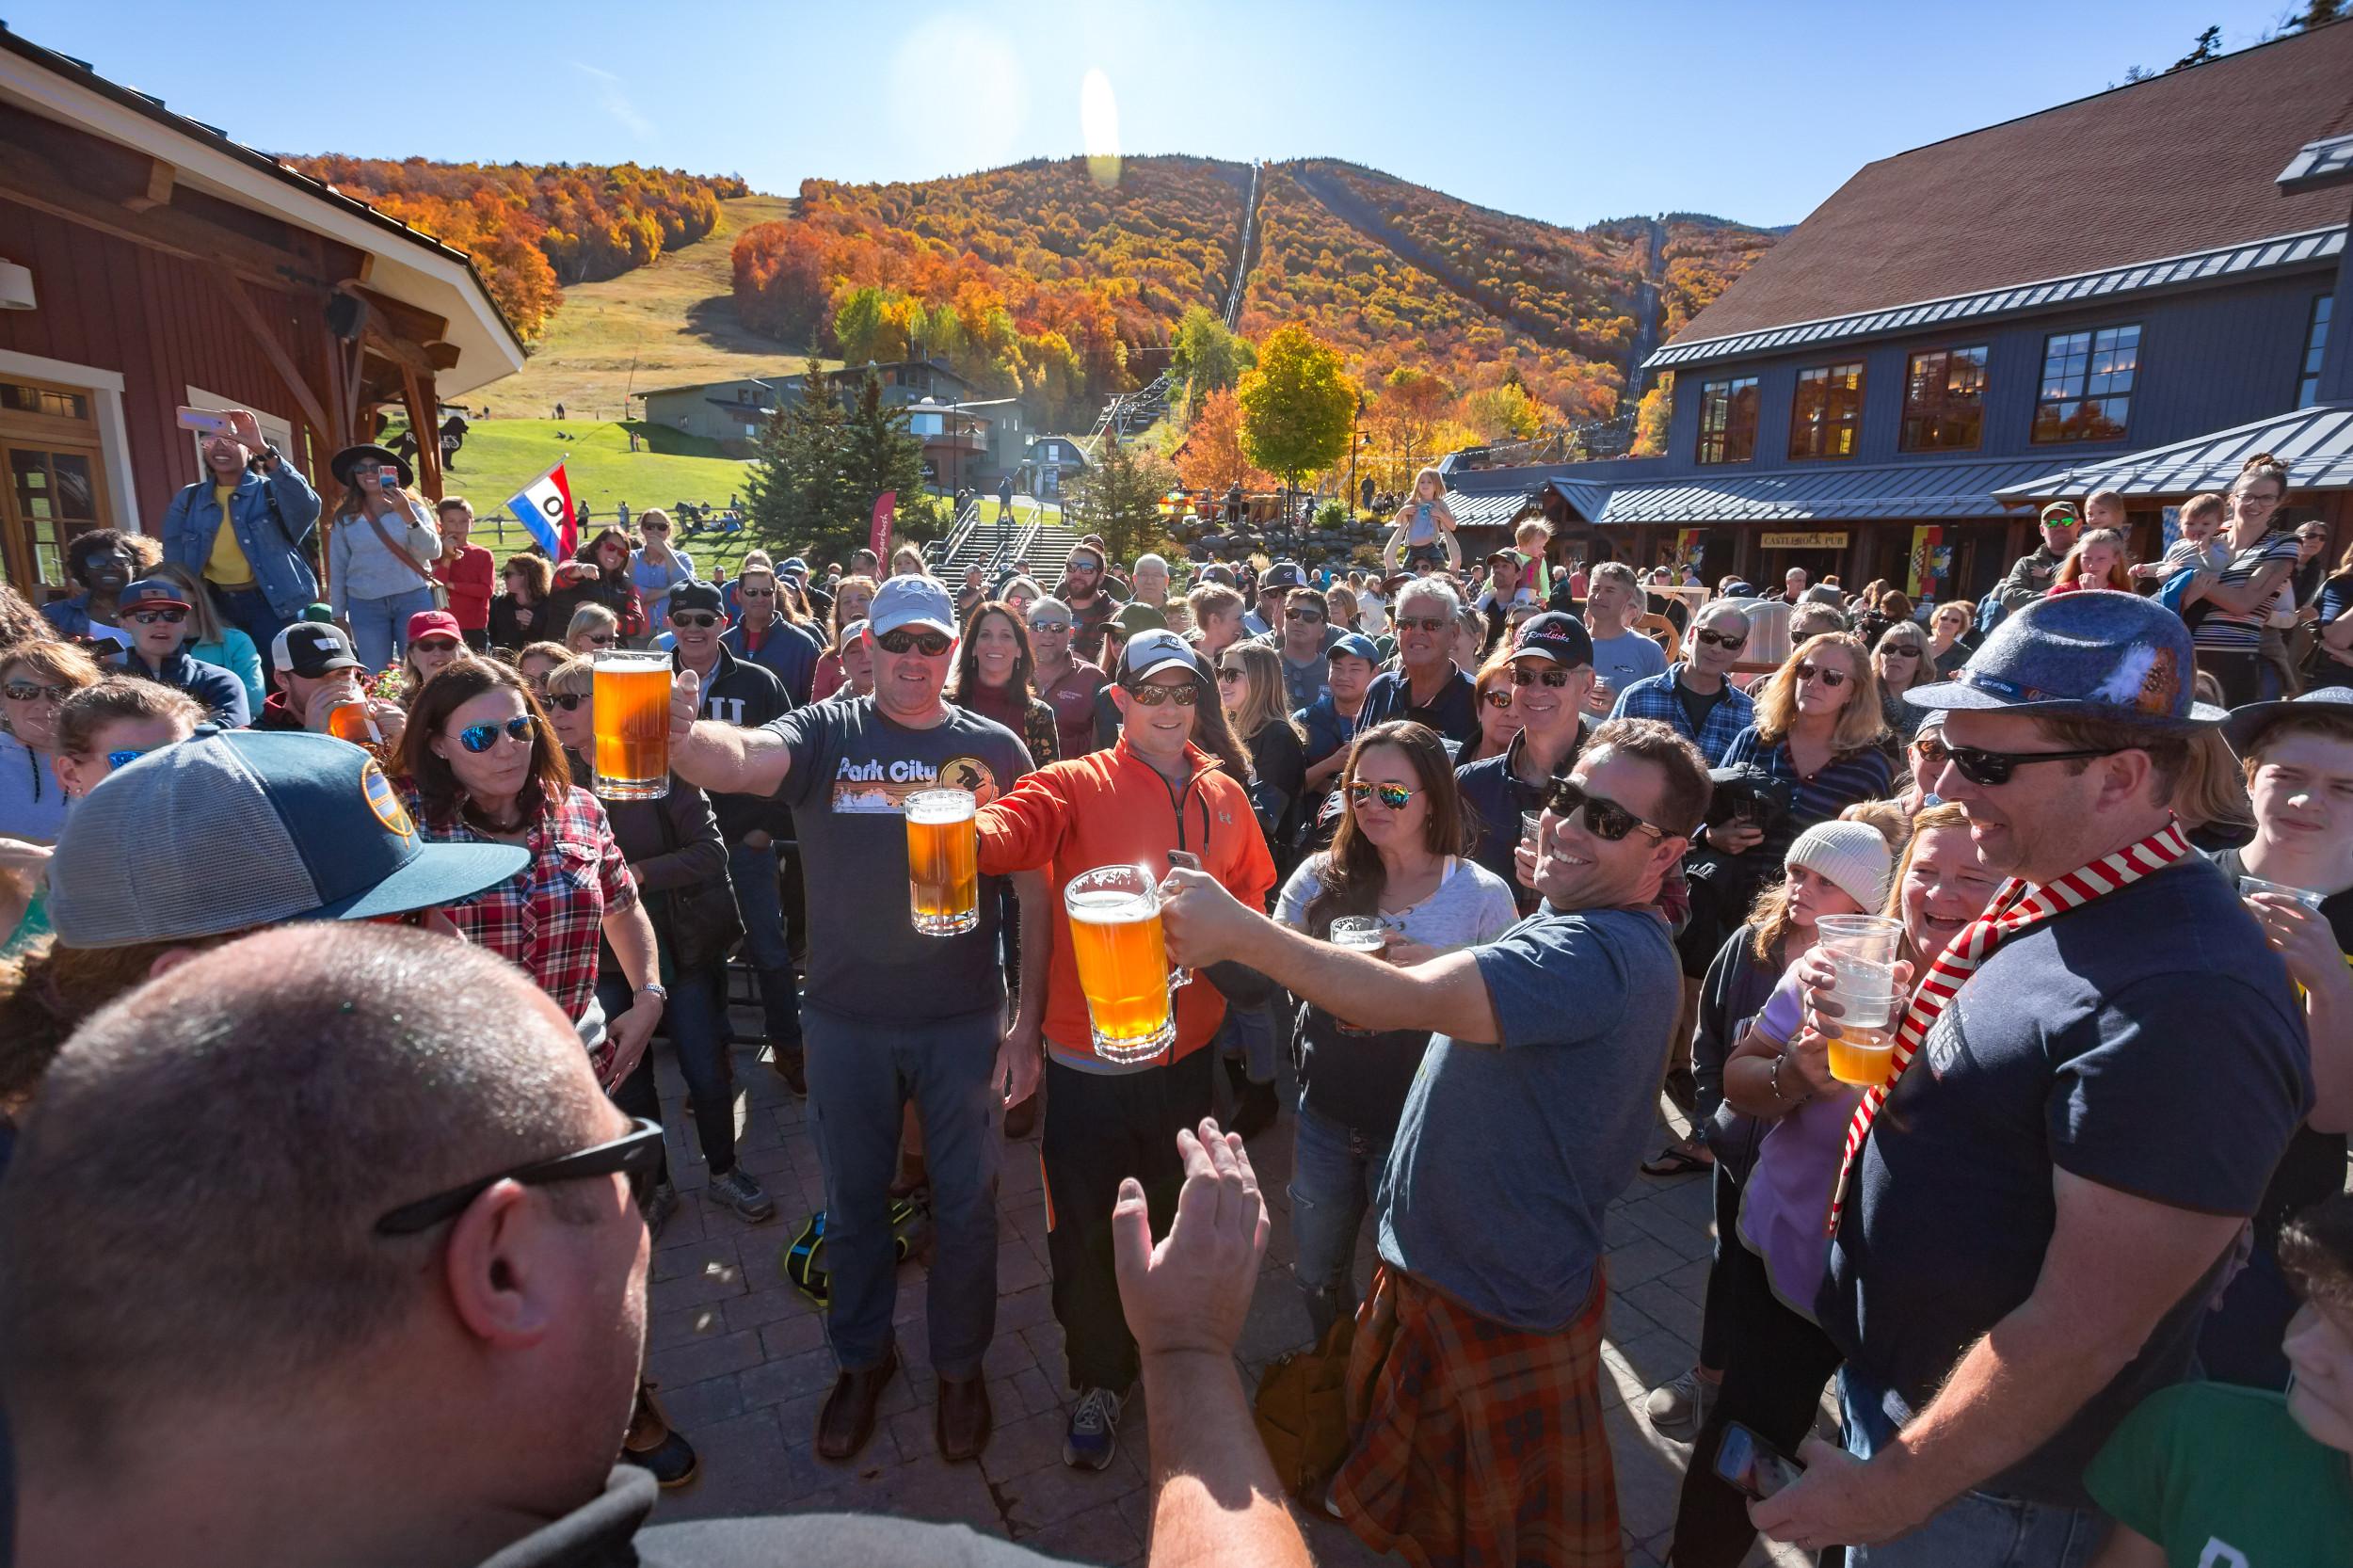 Crowd of people toasting full glasses of beer at a autumn festival